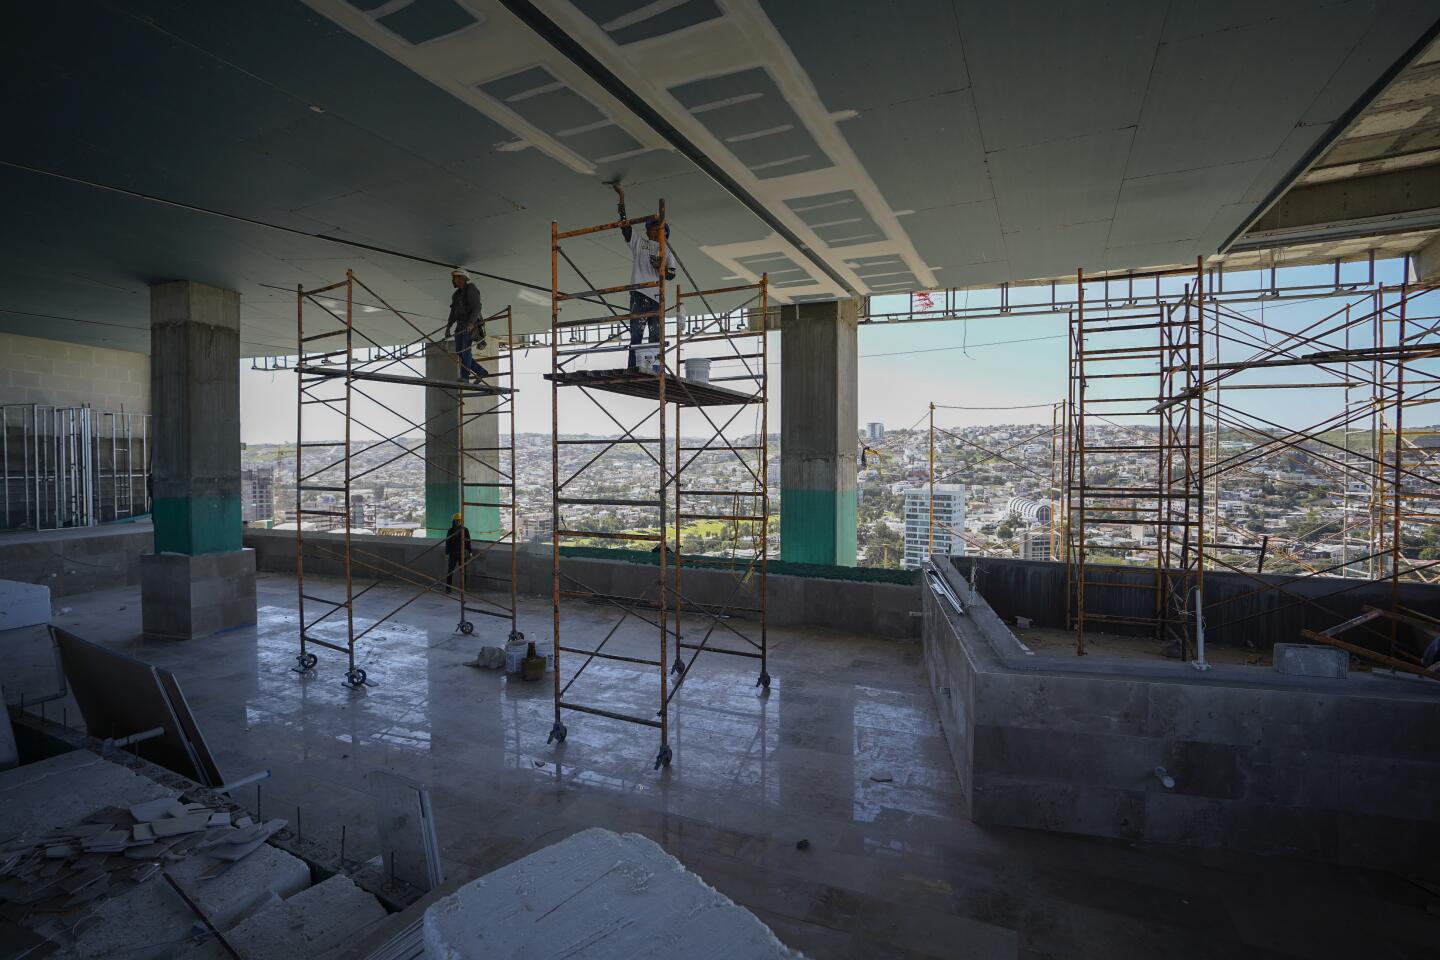 Sayan Campestre in Tijuana nears completion. It is the tallest building in the city's history at 403.5 feet. It is extremely exclusive with an average price of $500,000 and some reach $1.3 million. Amenities are extensive with a restaurant just for resid